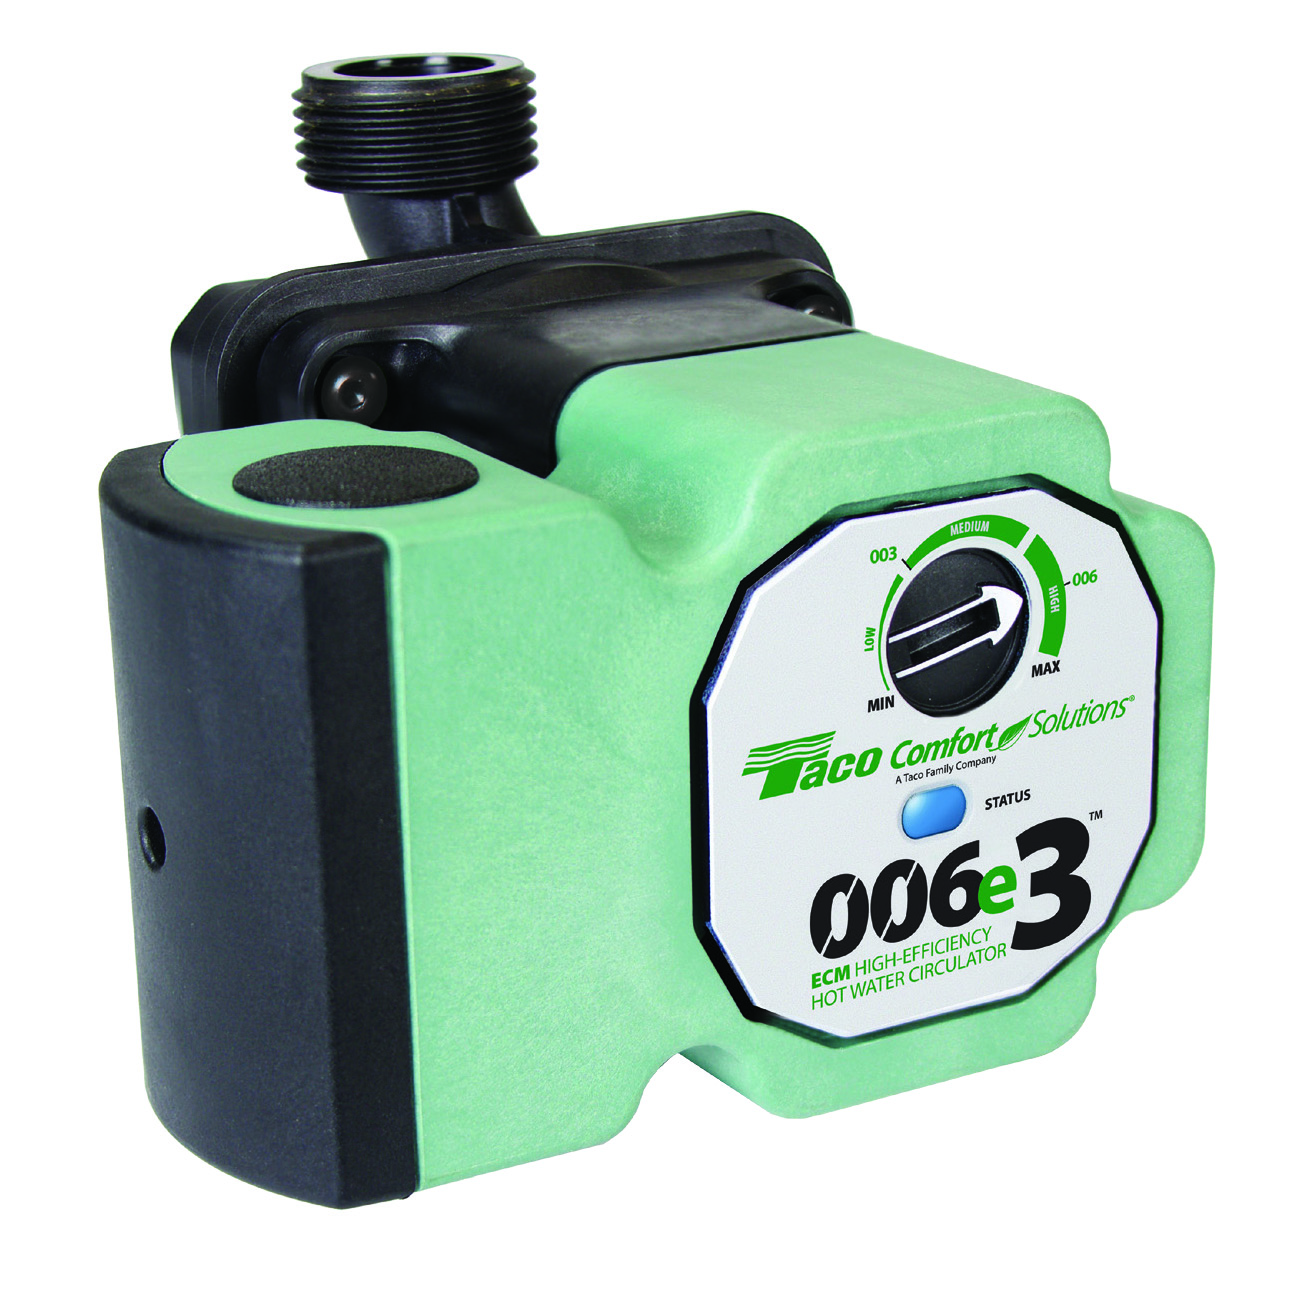 006E3LC ECM High-Efficiency Hot Water Circulation Pump with 6 ft Cord